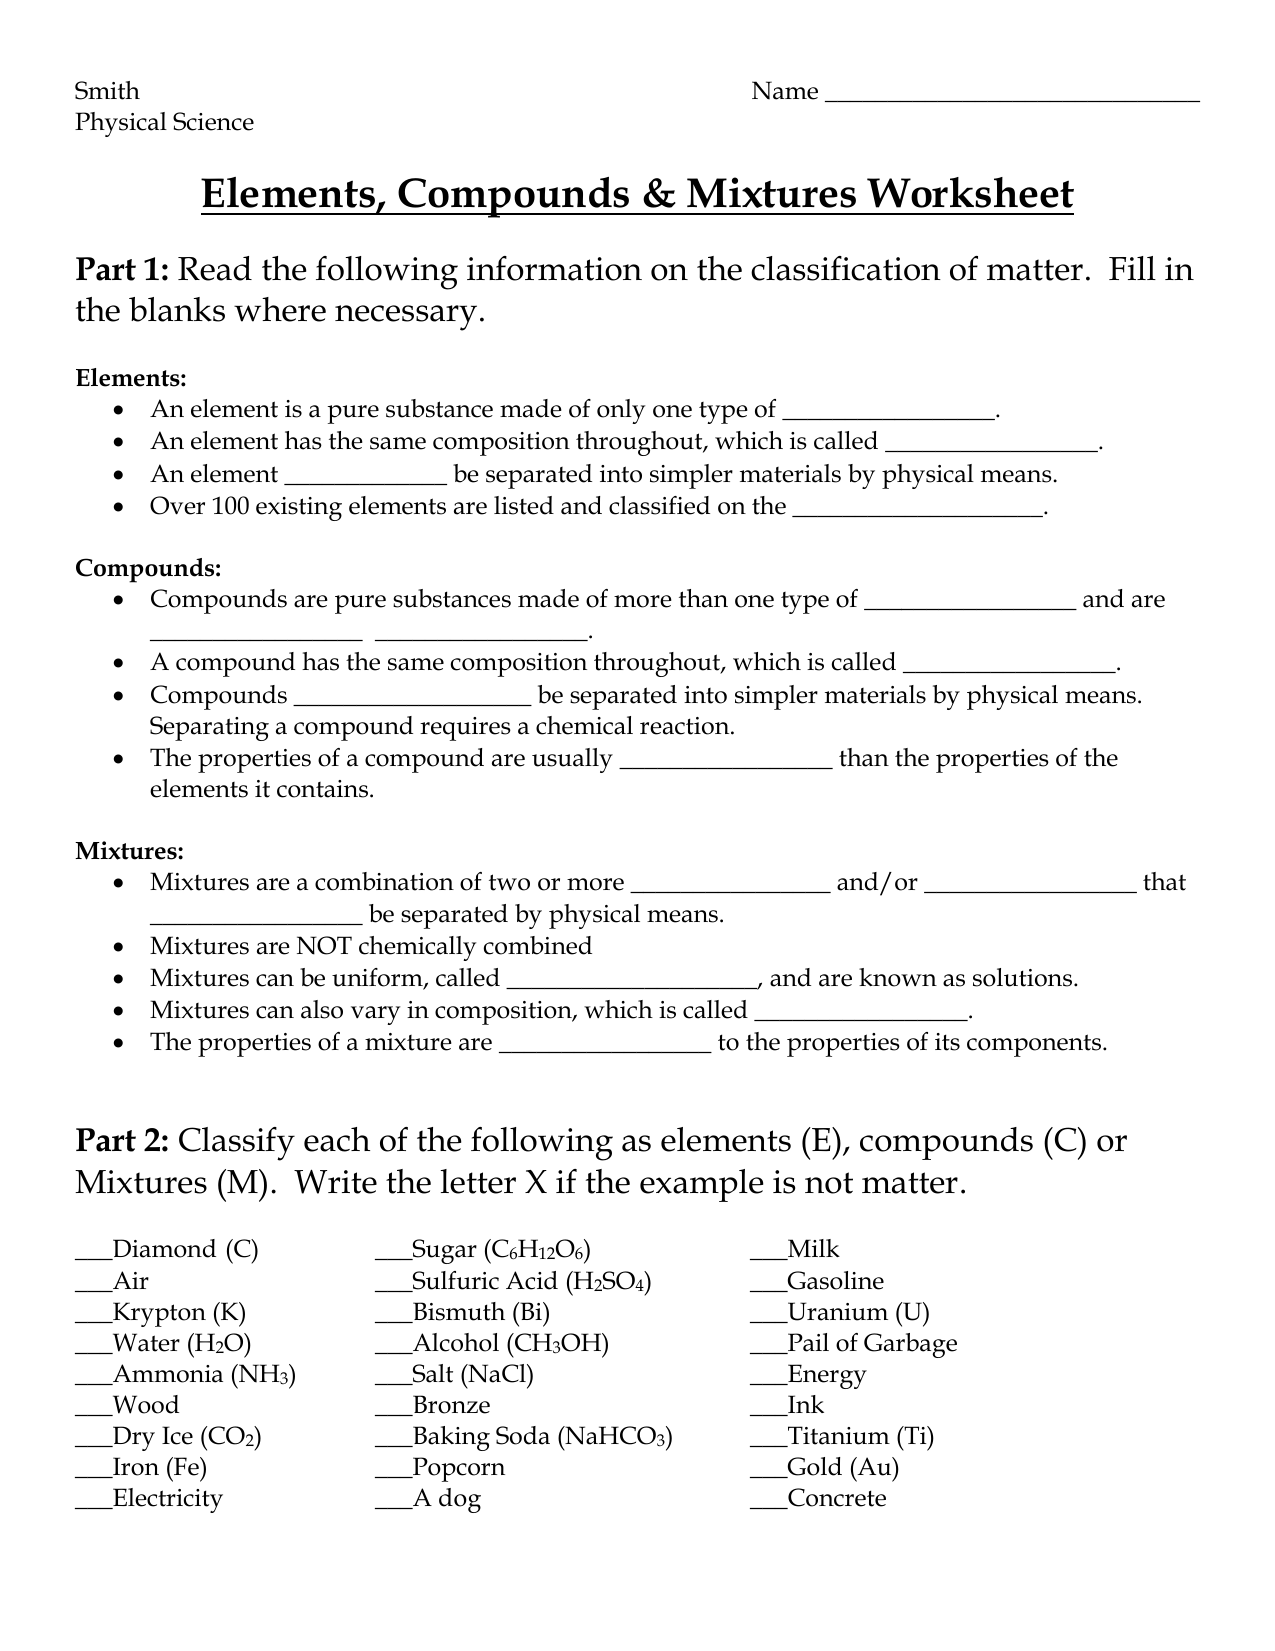 Elements, Compounds & Mixtures Worksheet Pertaining To Mixtures Worksheet Answer Key